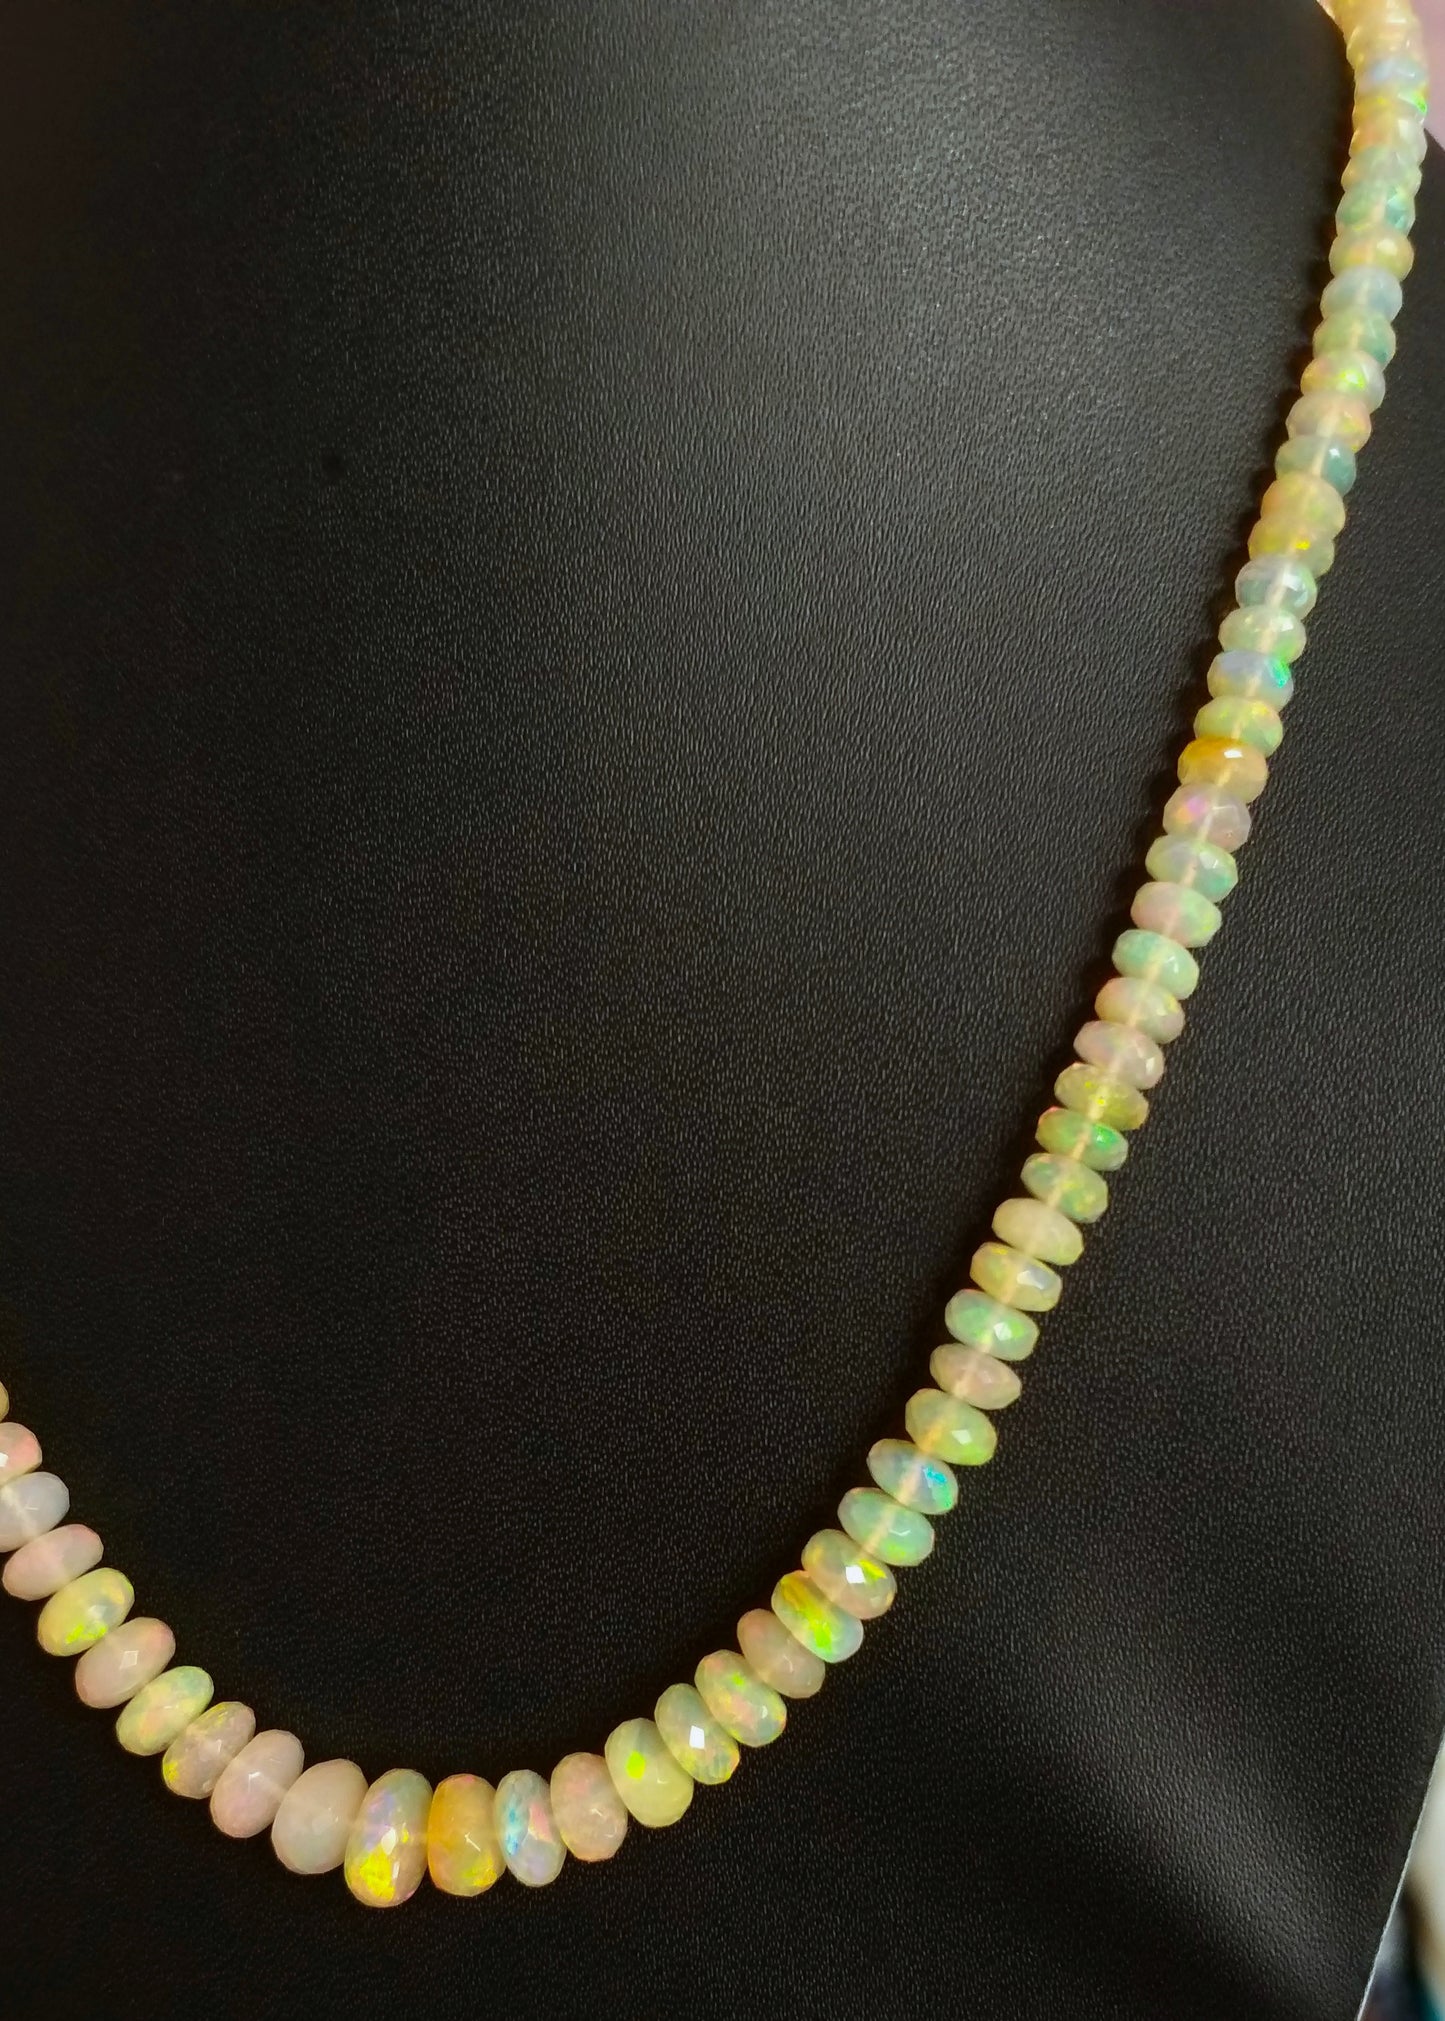 Natural Ethiopian Welo Precious Faceted Opal Beads Necklace,  Single Strand Necklace